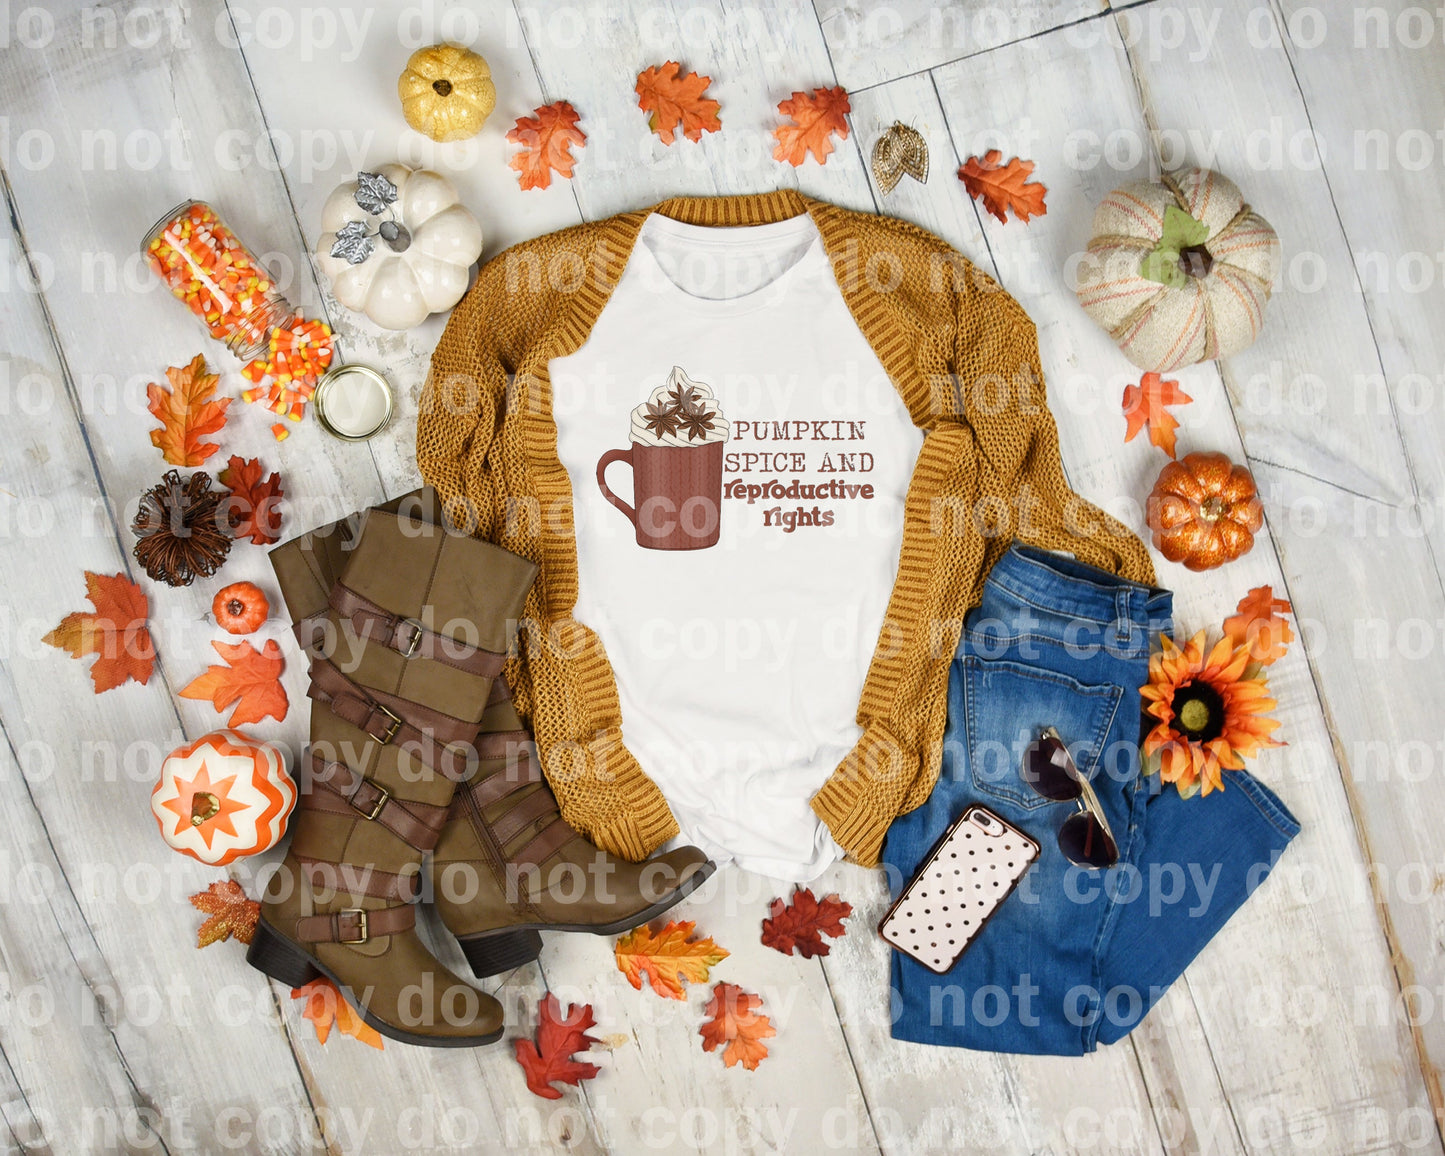 Pumpkin Spice And Reproductive Rights Dream Print or Sublimation Print